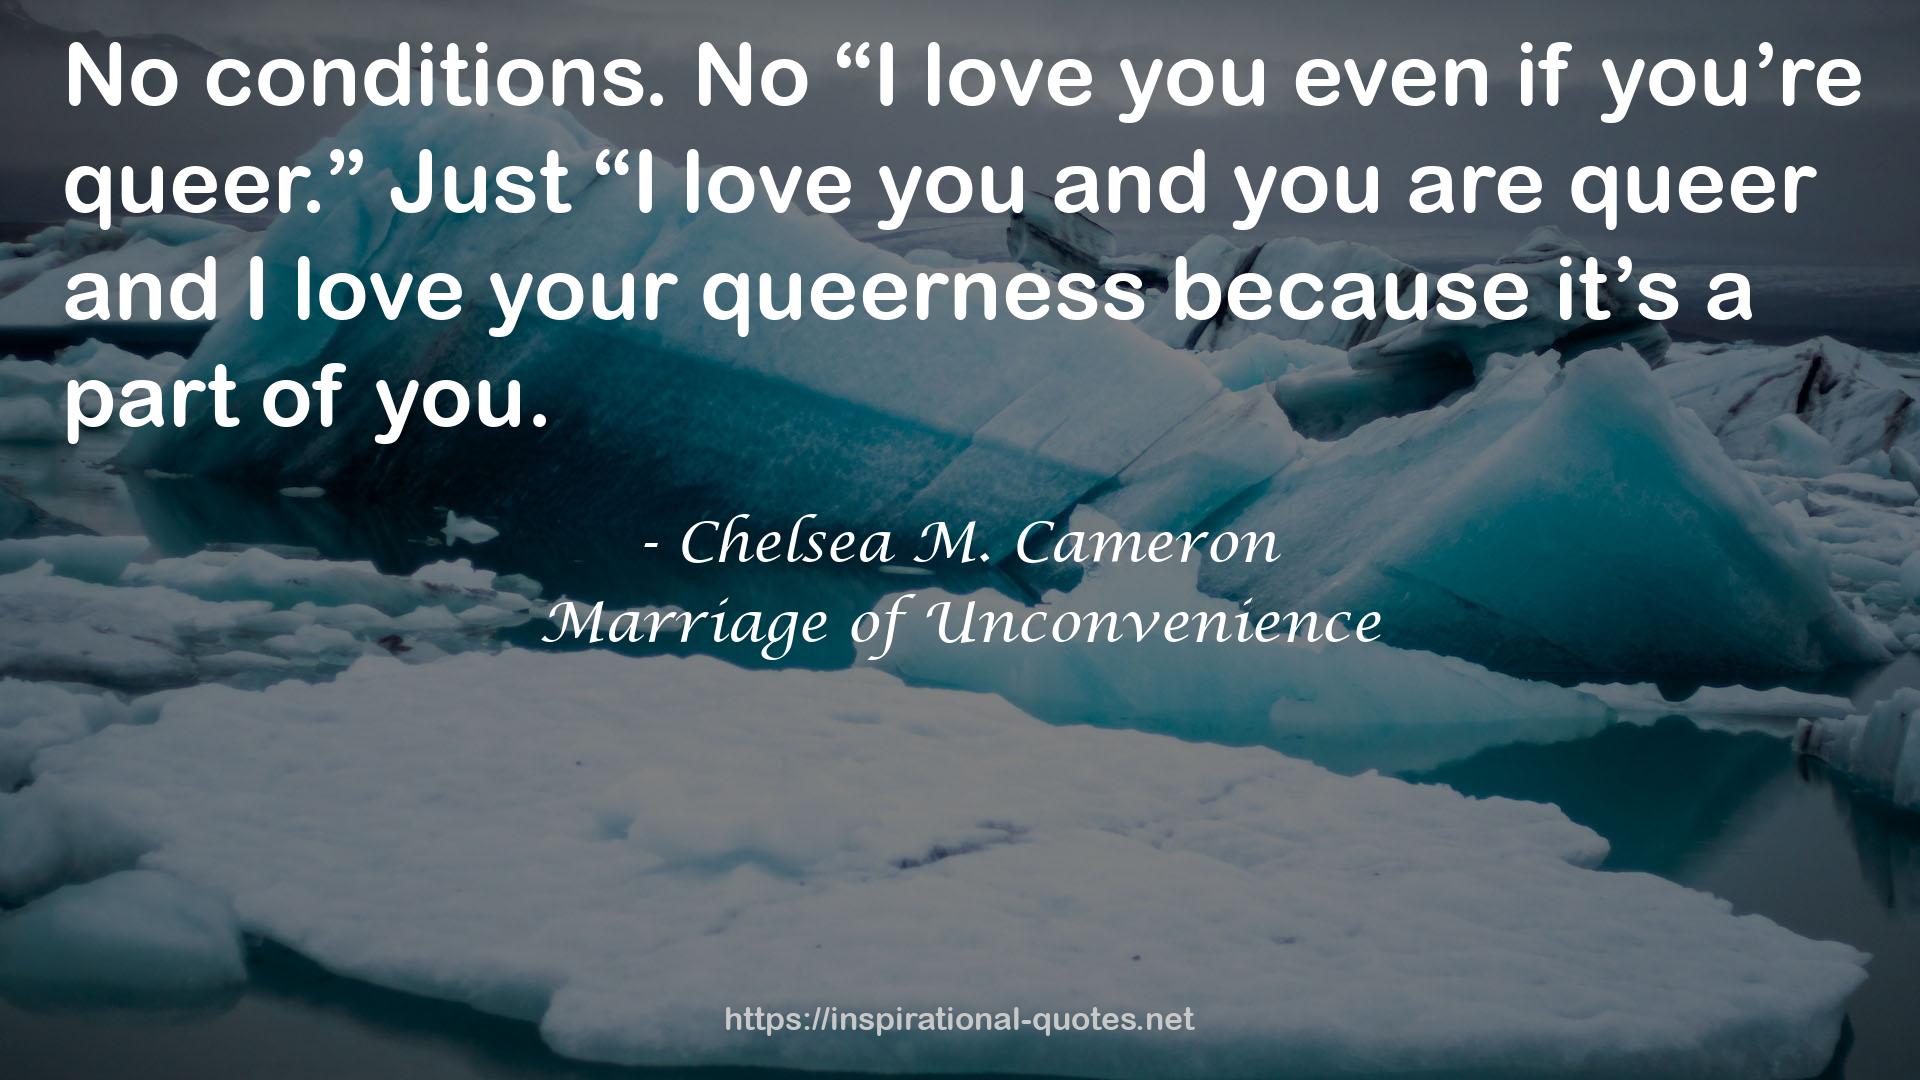 Marriage of Unconvenience QUOTES